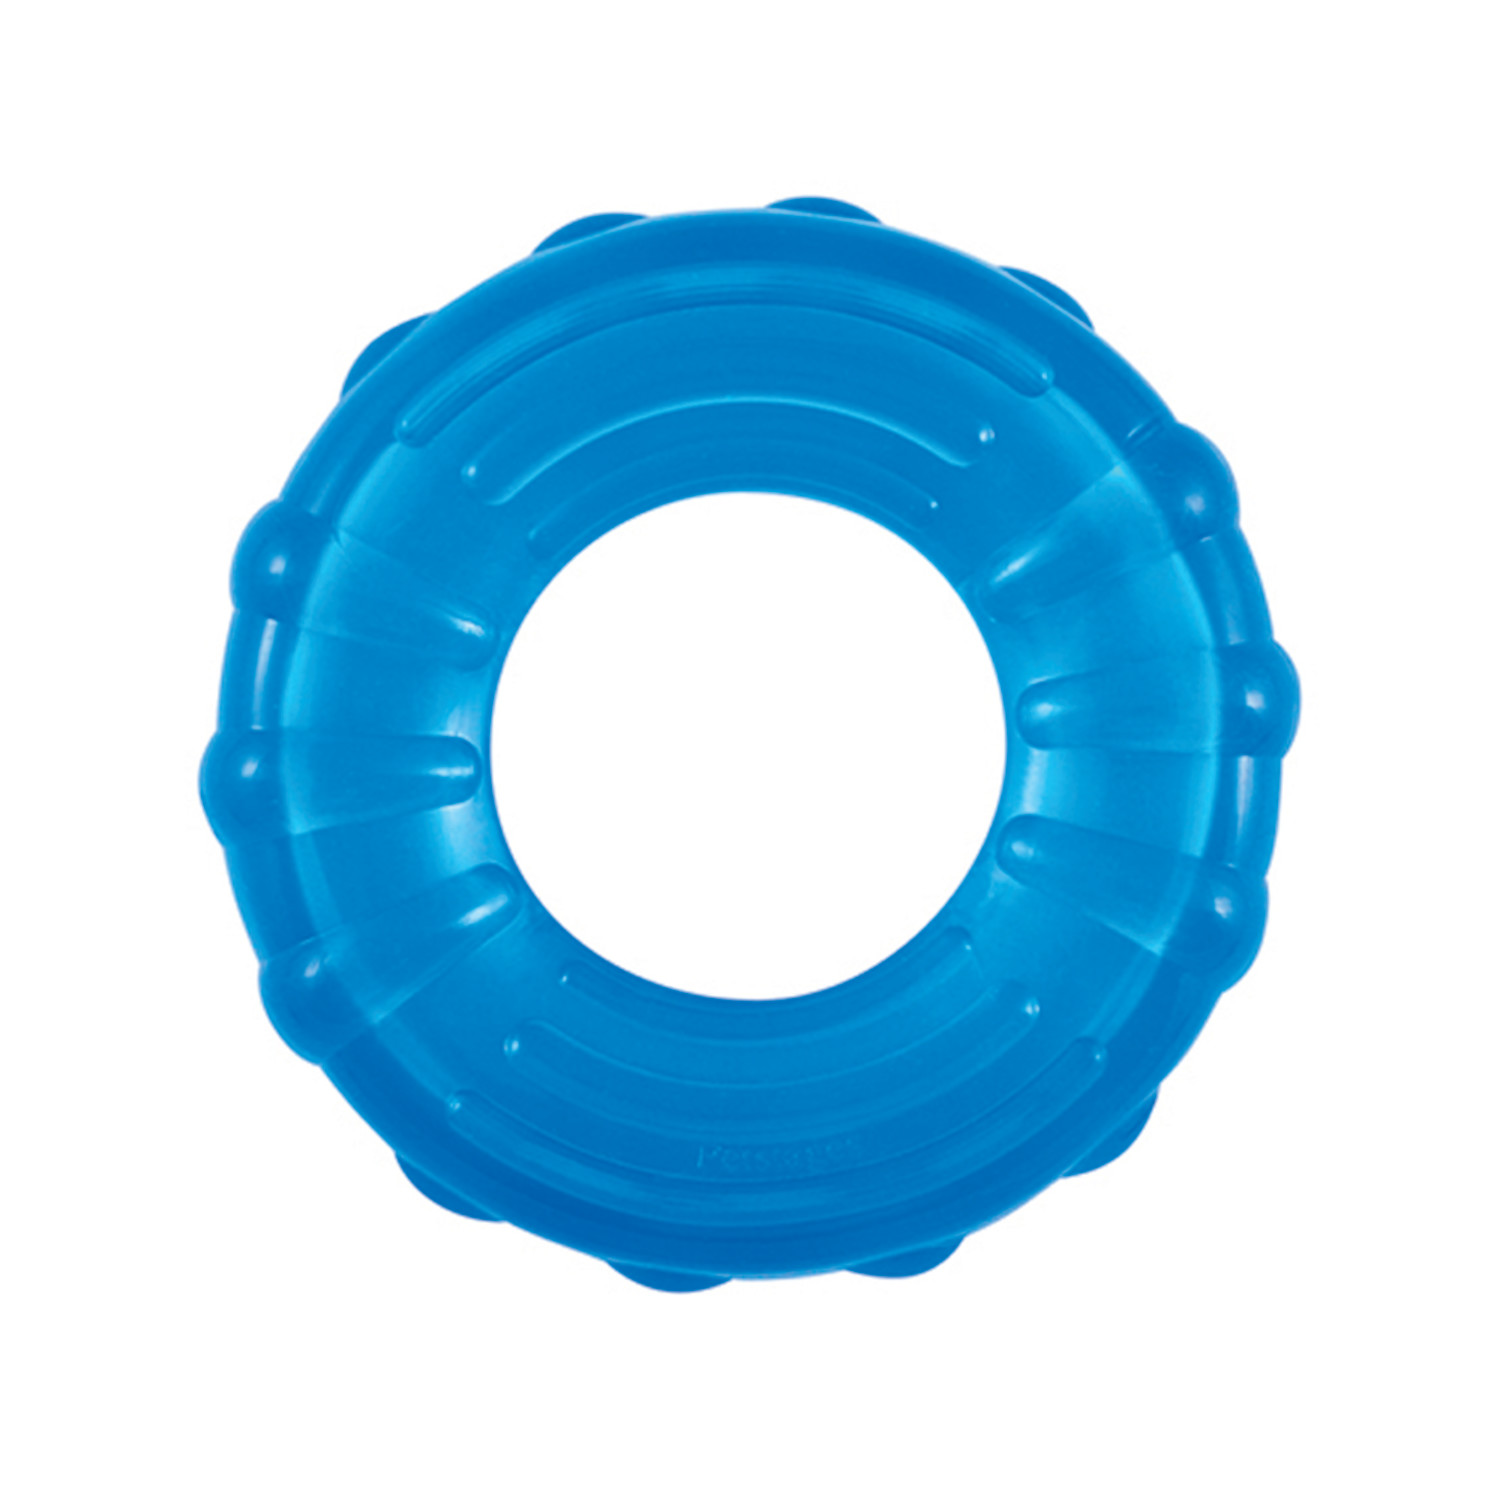 Product image for Orka Alternative Dog Chew Toy, Tire